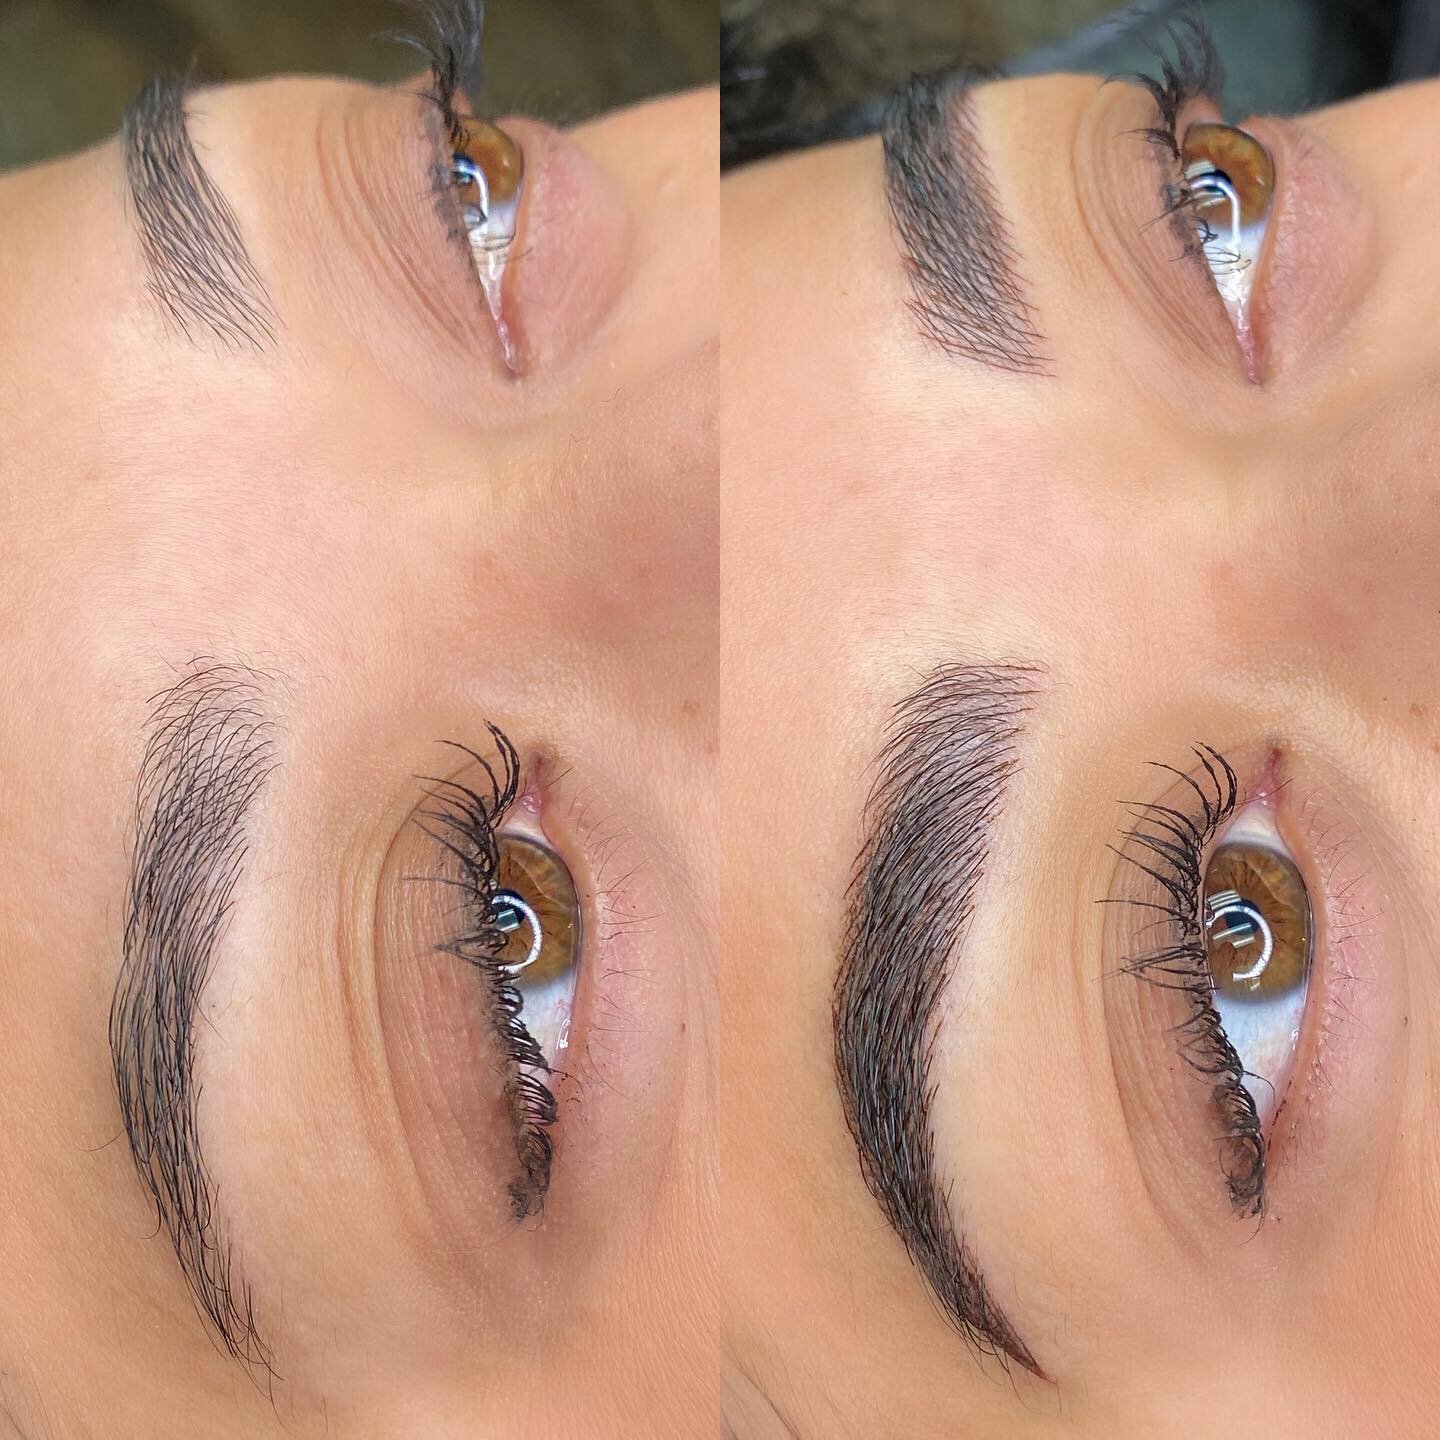 When that combo brow just blends seamlessly 🤩 Using shades Schokolade and Tokyo black from the @browdaddy Gold collection ✨
&bull;
&bull;
&bull;
&bull;
&bull;
#microbladingtraining #sandiego #sandiegomicroblading #microblading #sandiegomicrobladingt